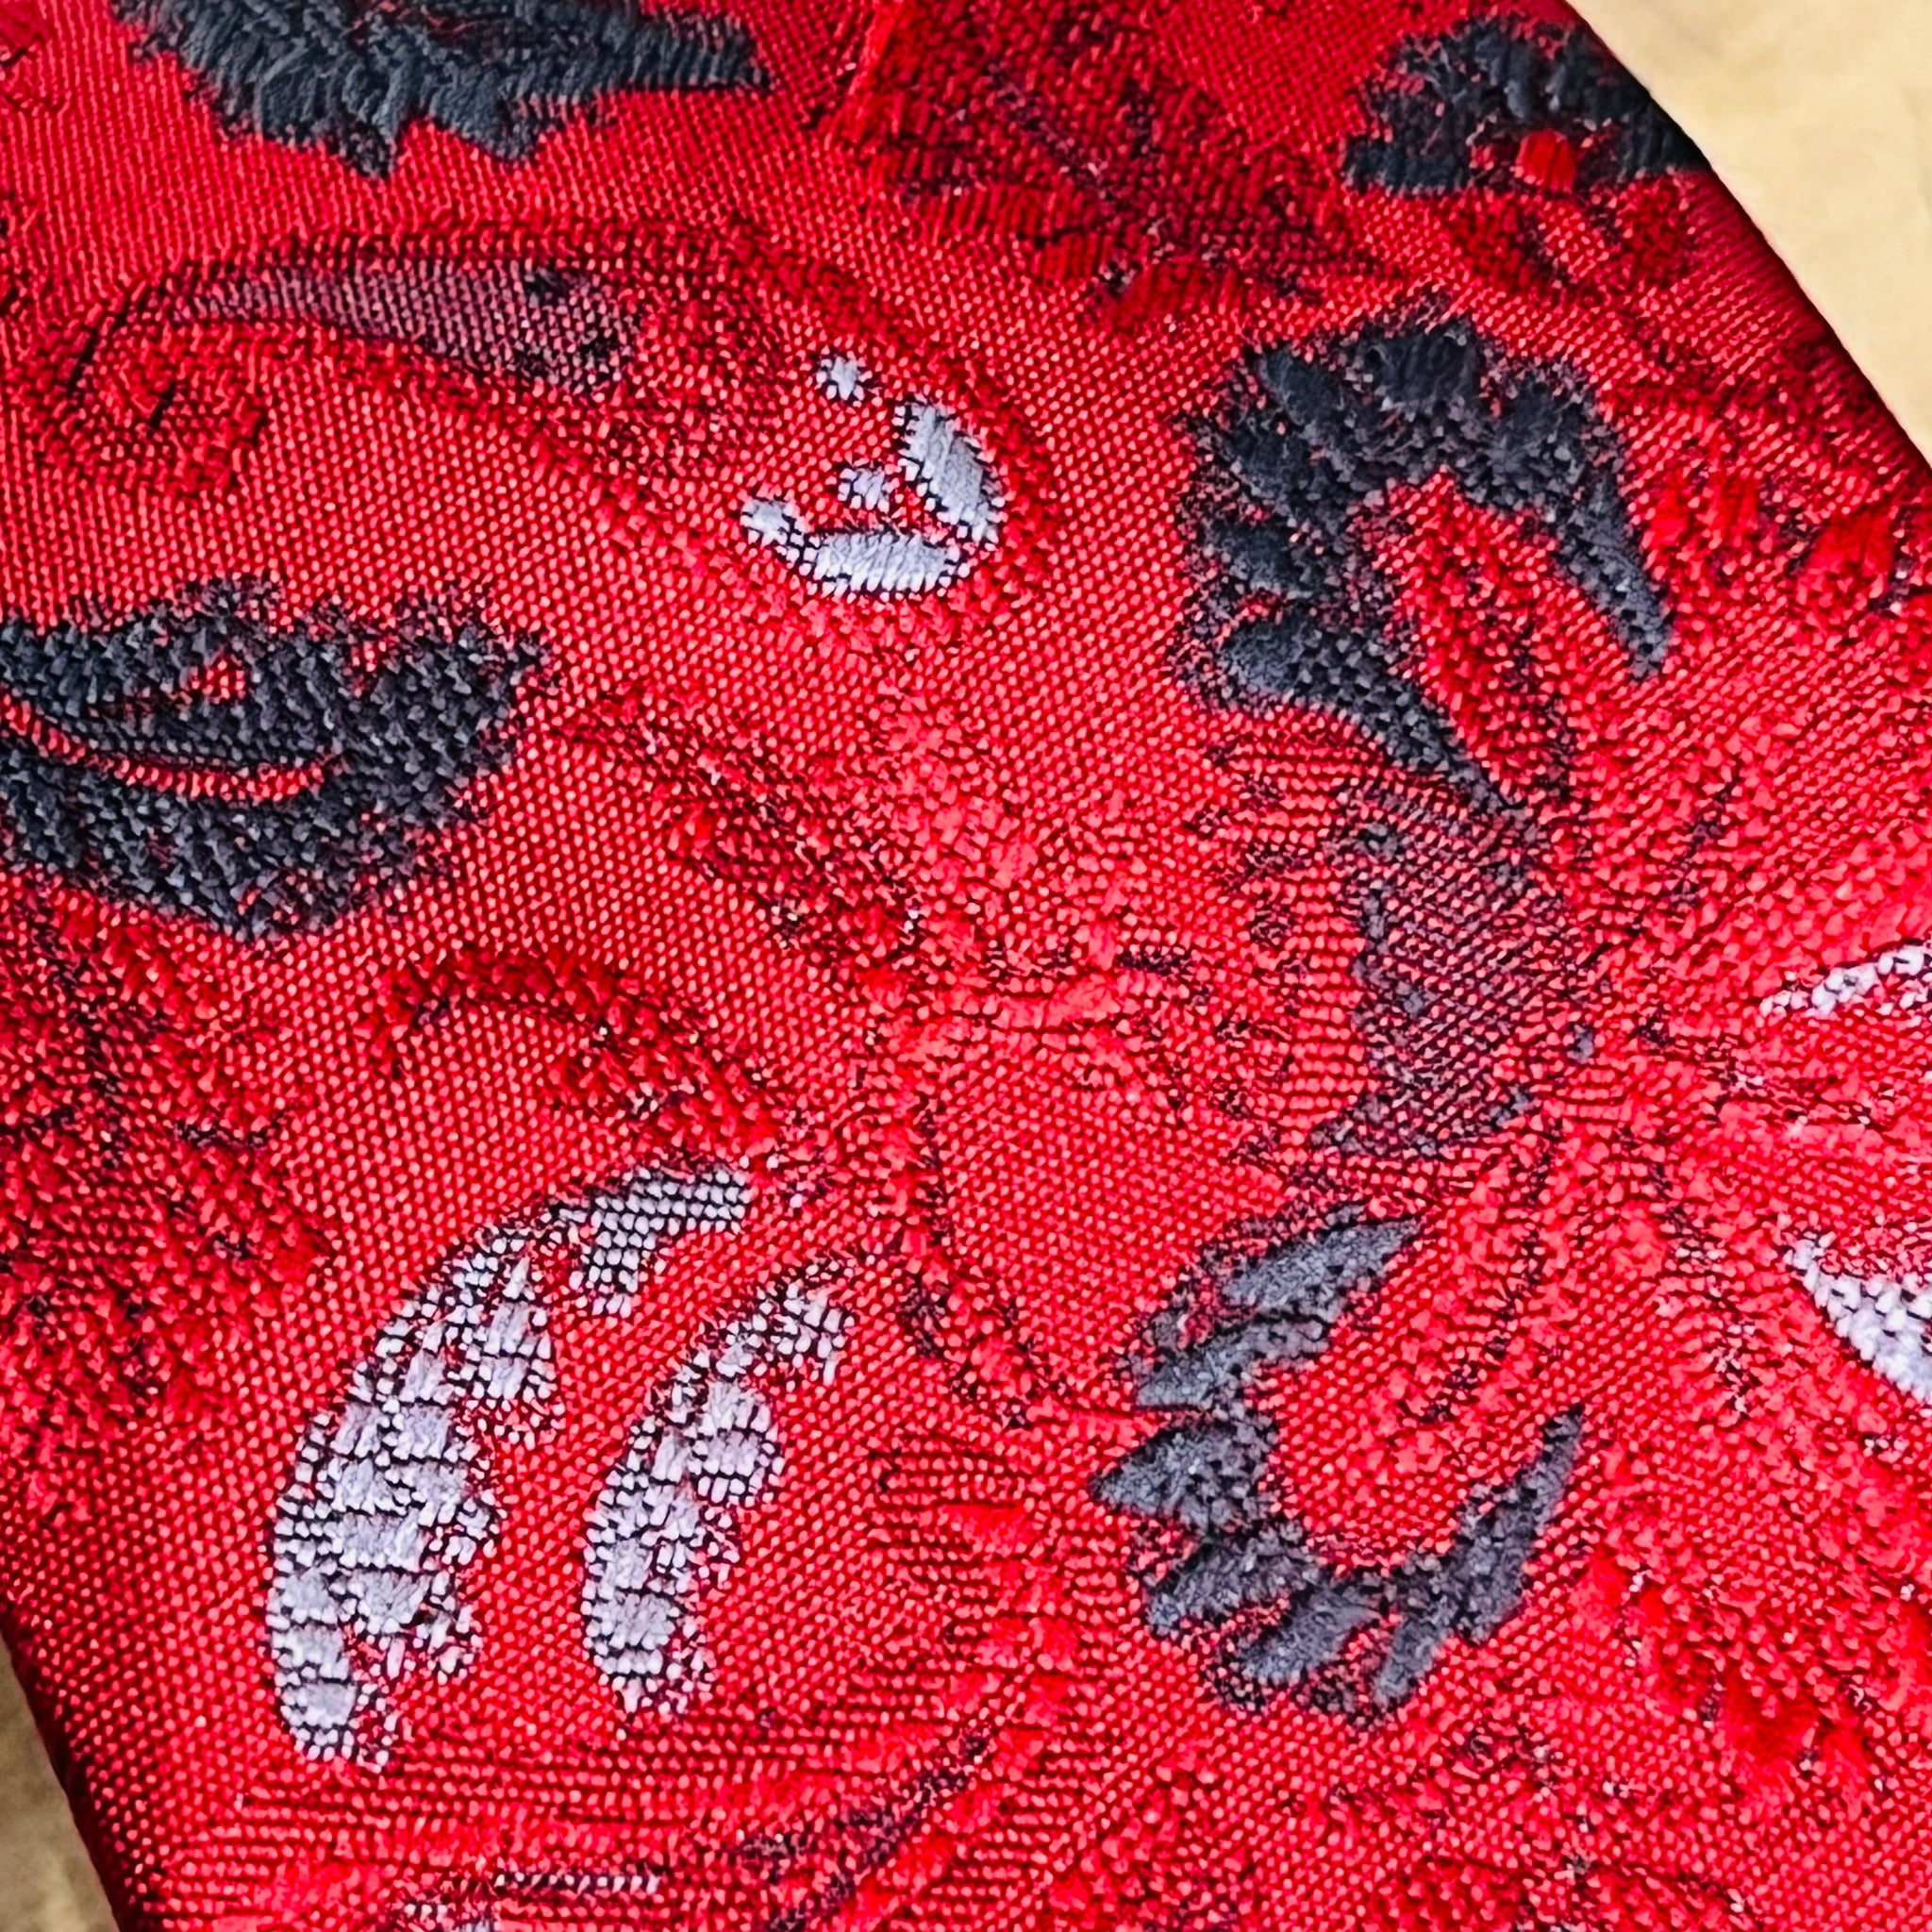 Tie - Red Paisley Floral Design